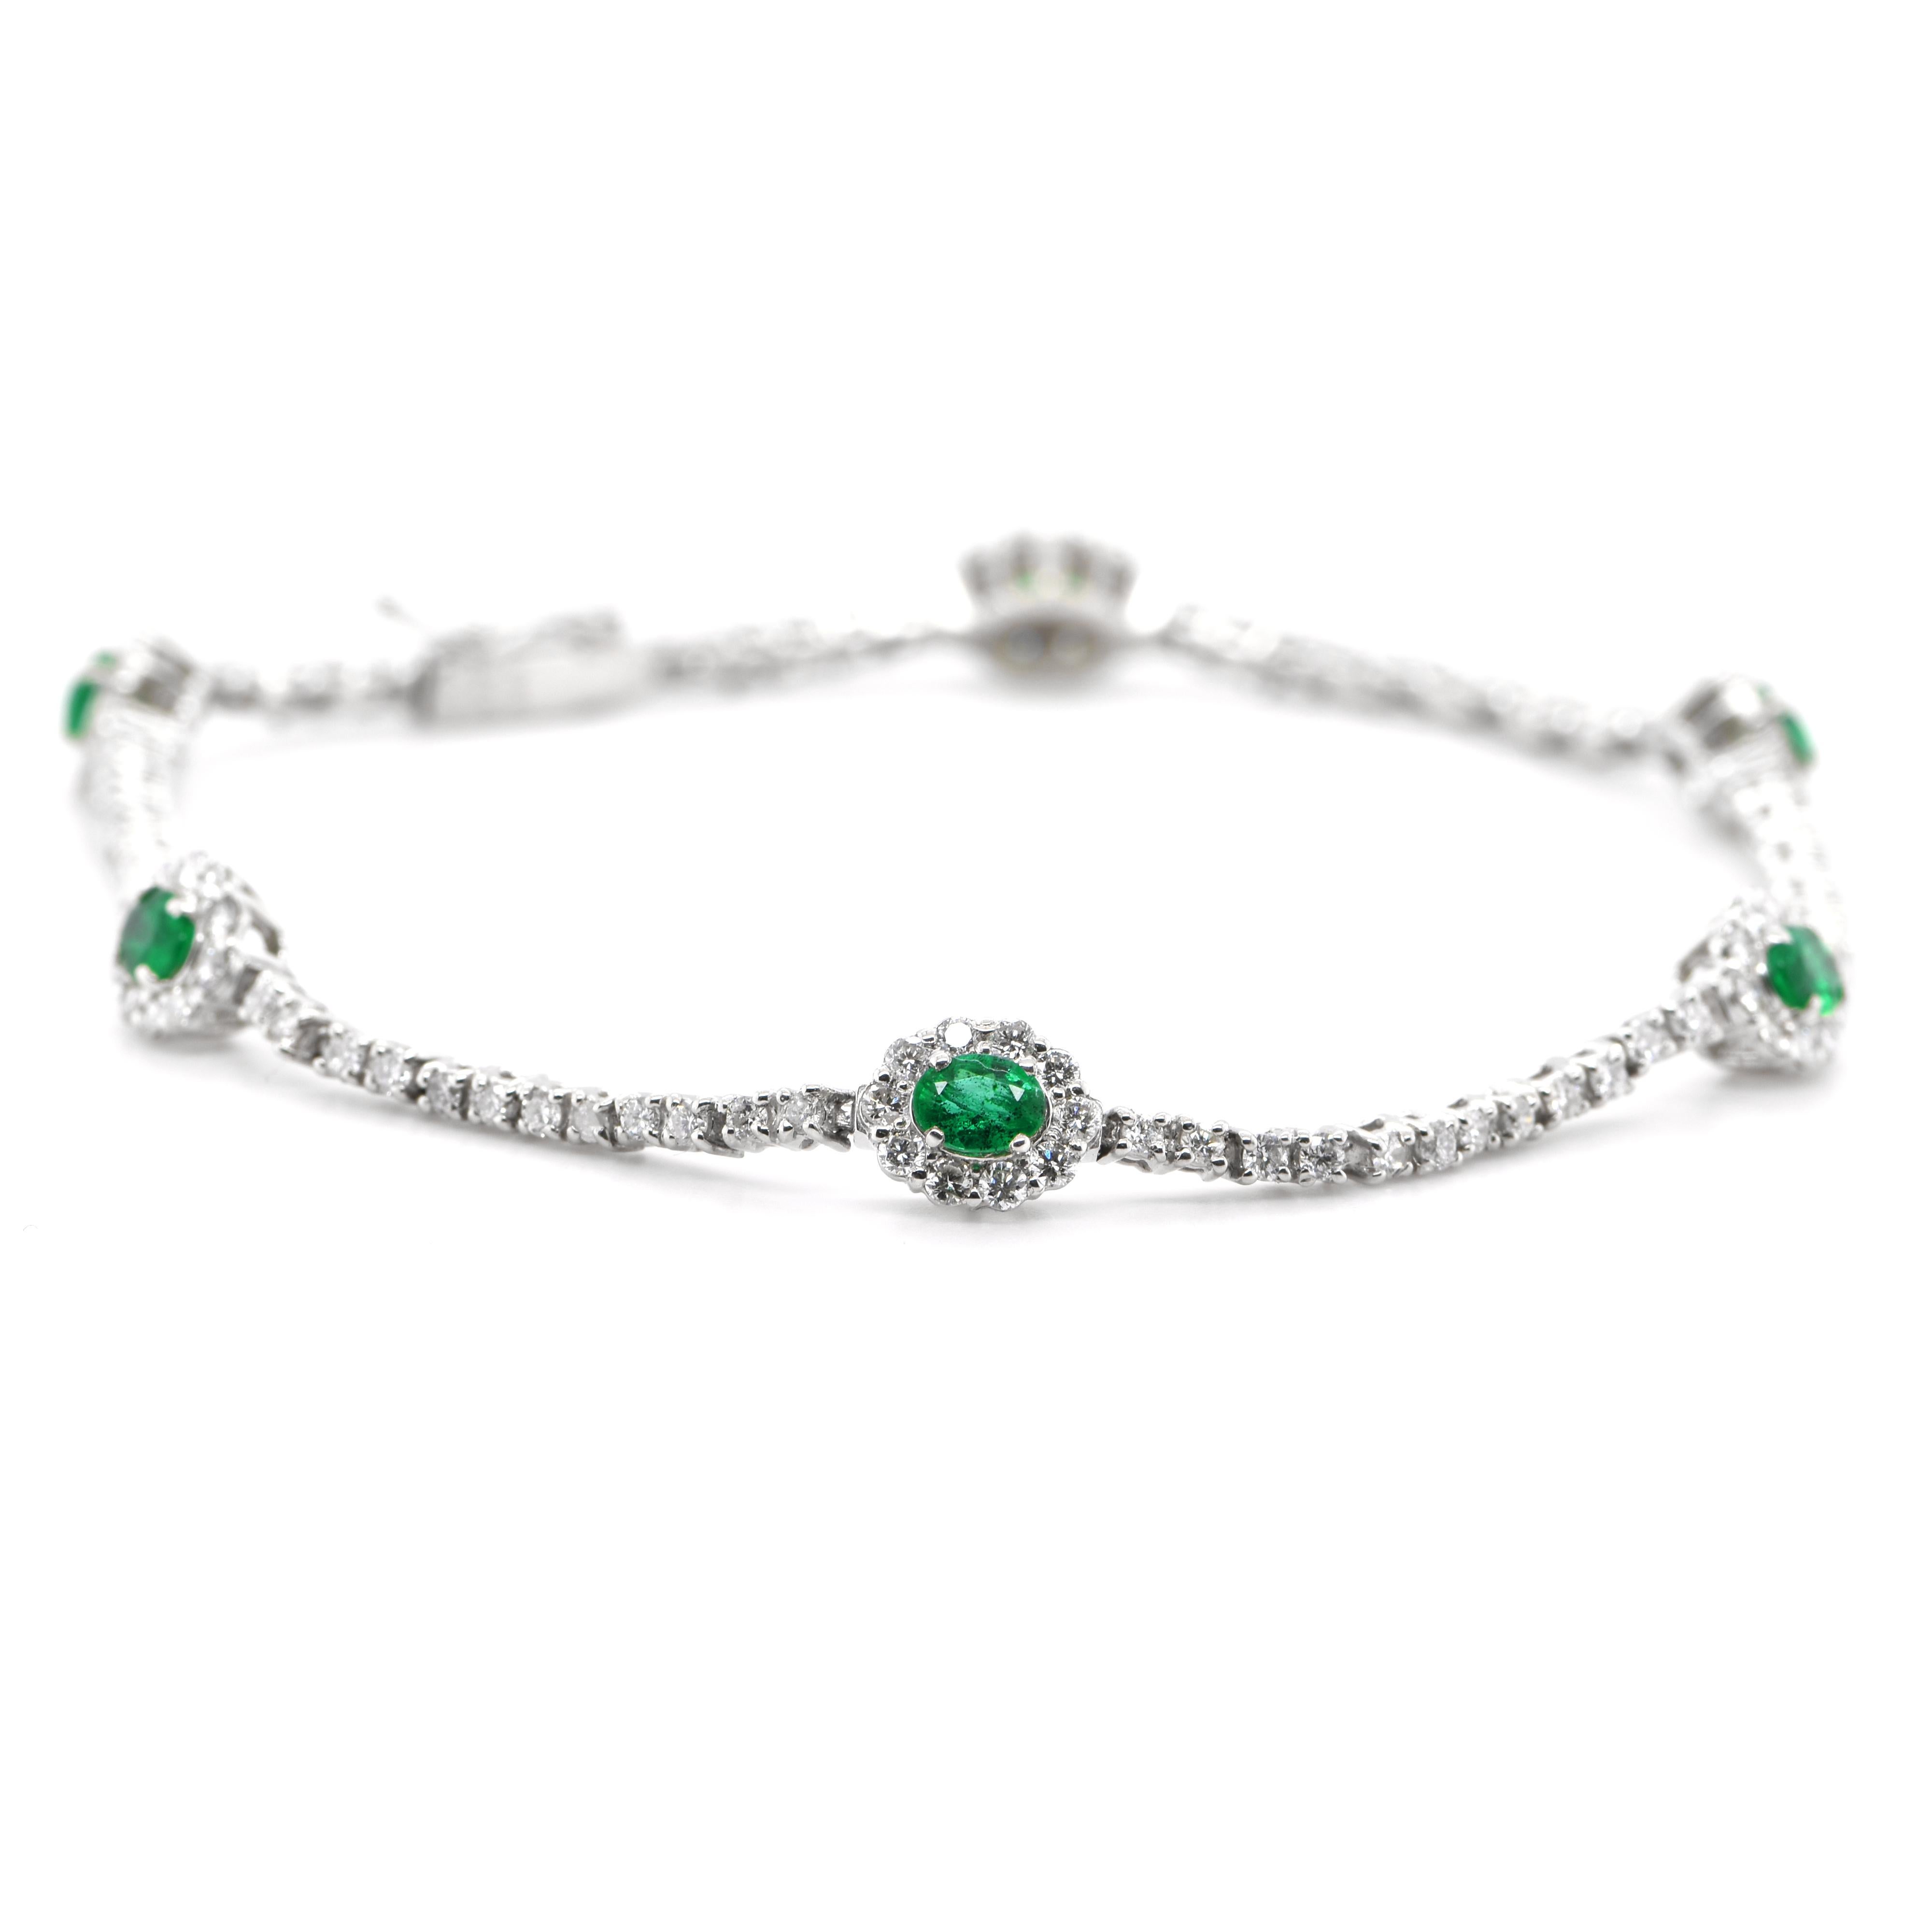 A beautiful Tennis Bracelet featuring a total of 0.86 Carats of Natural Emeralds and 1.43 Carats of Diamond Accents set in Platinum. The Emerald are of 5x3mm size. People have admired emerald’s green for thousands of years. Emeralds have always been